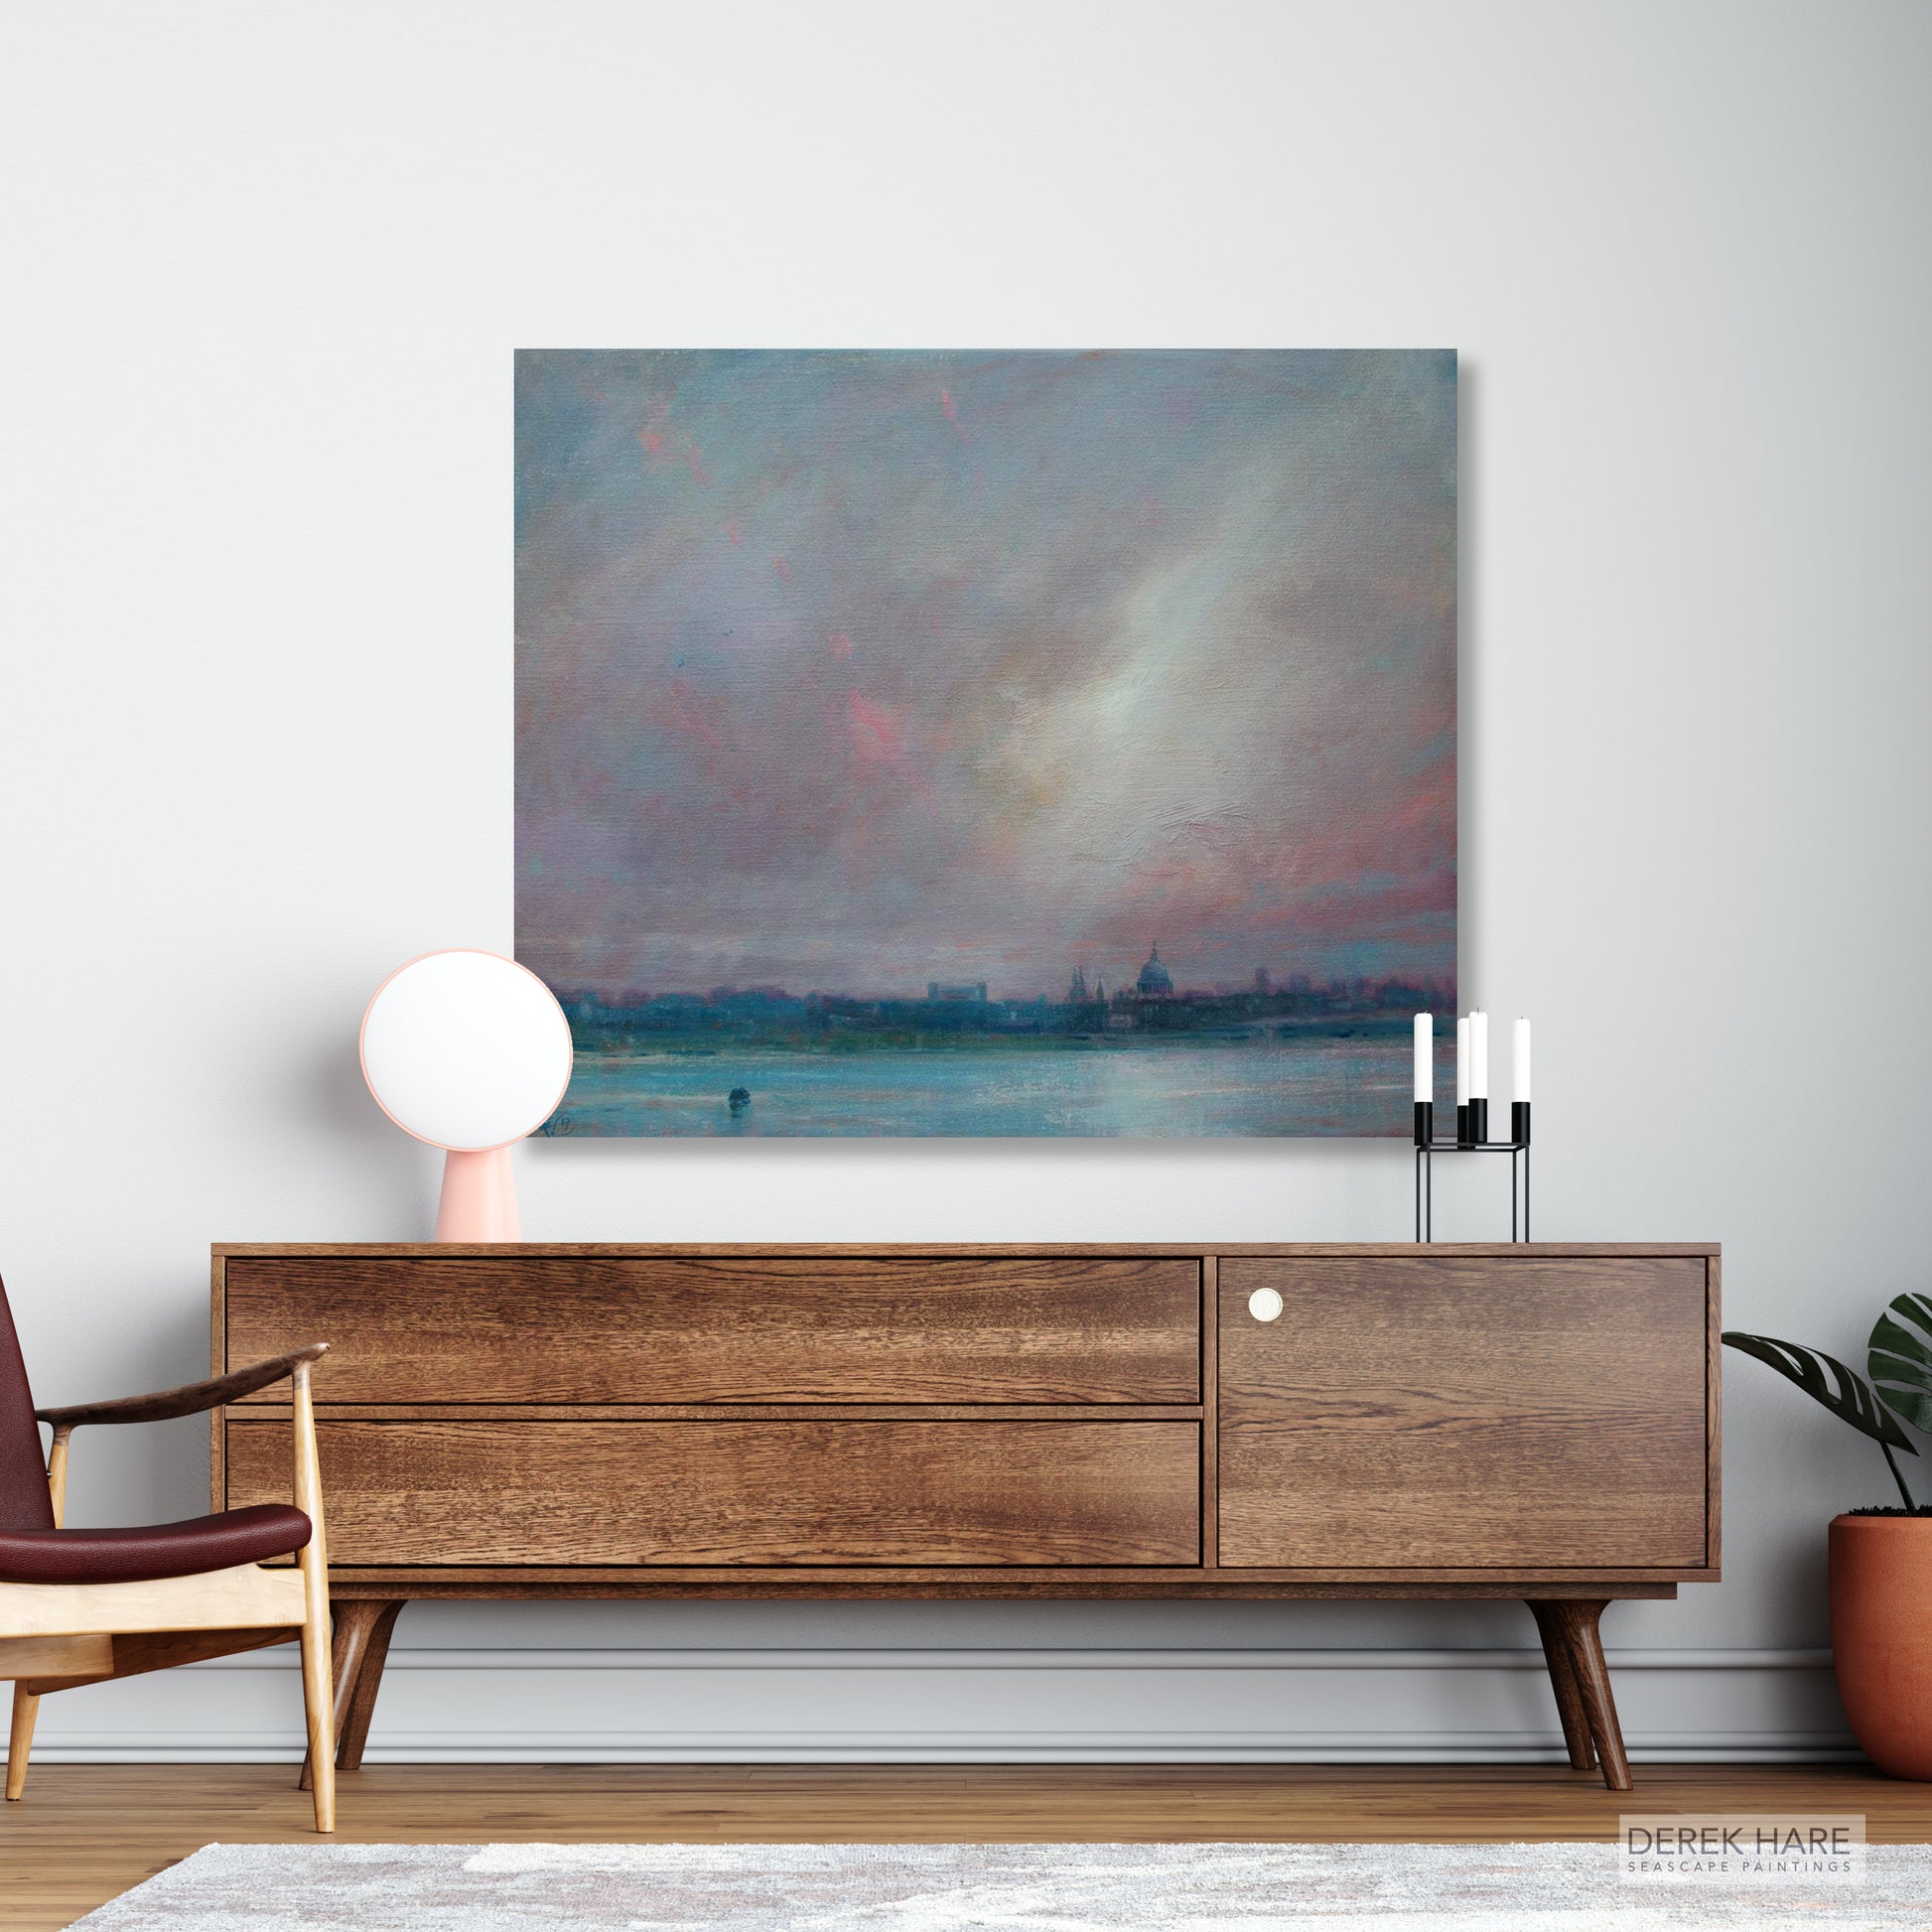 Seascape Canvas Painting, Ocean Wall Art, London Wall Art, St Paul's Cathedral painting. London Painting, Signed by Artist